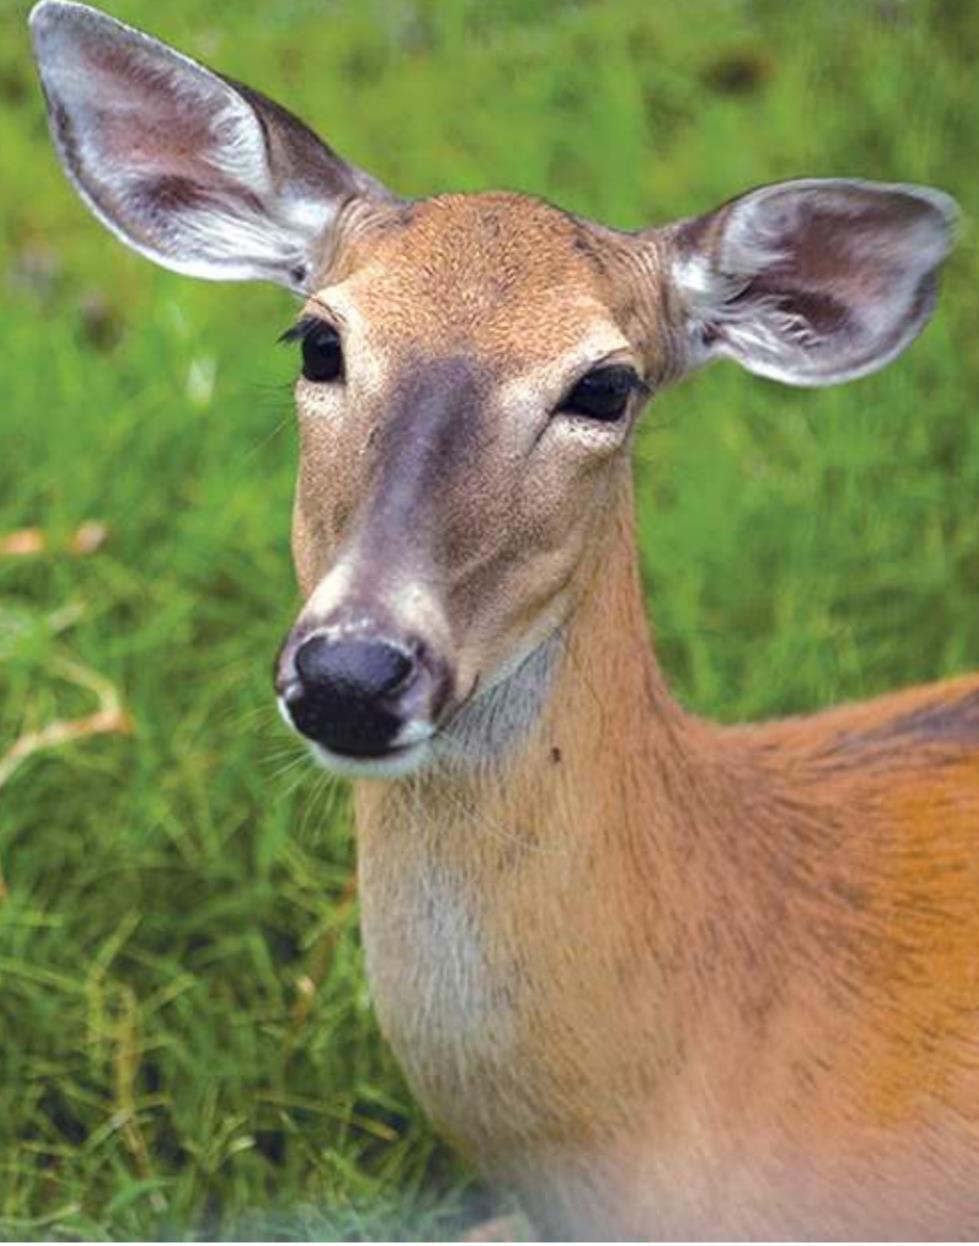 Provided Oklahoma wildlife is going crazy for acorns, which is great news for deer hunters